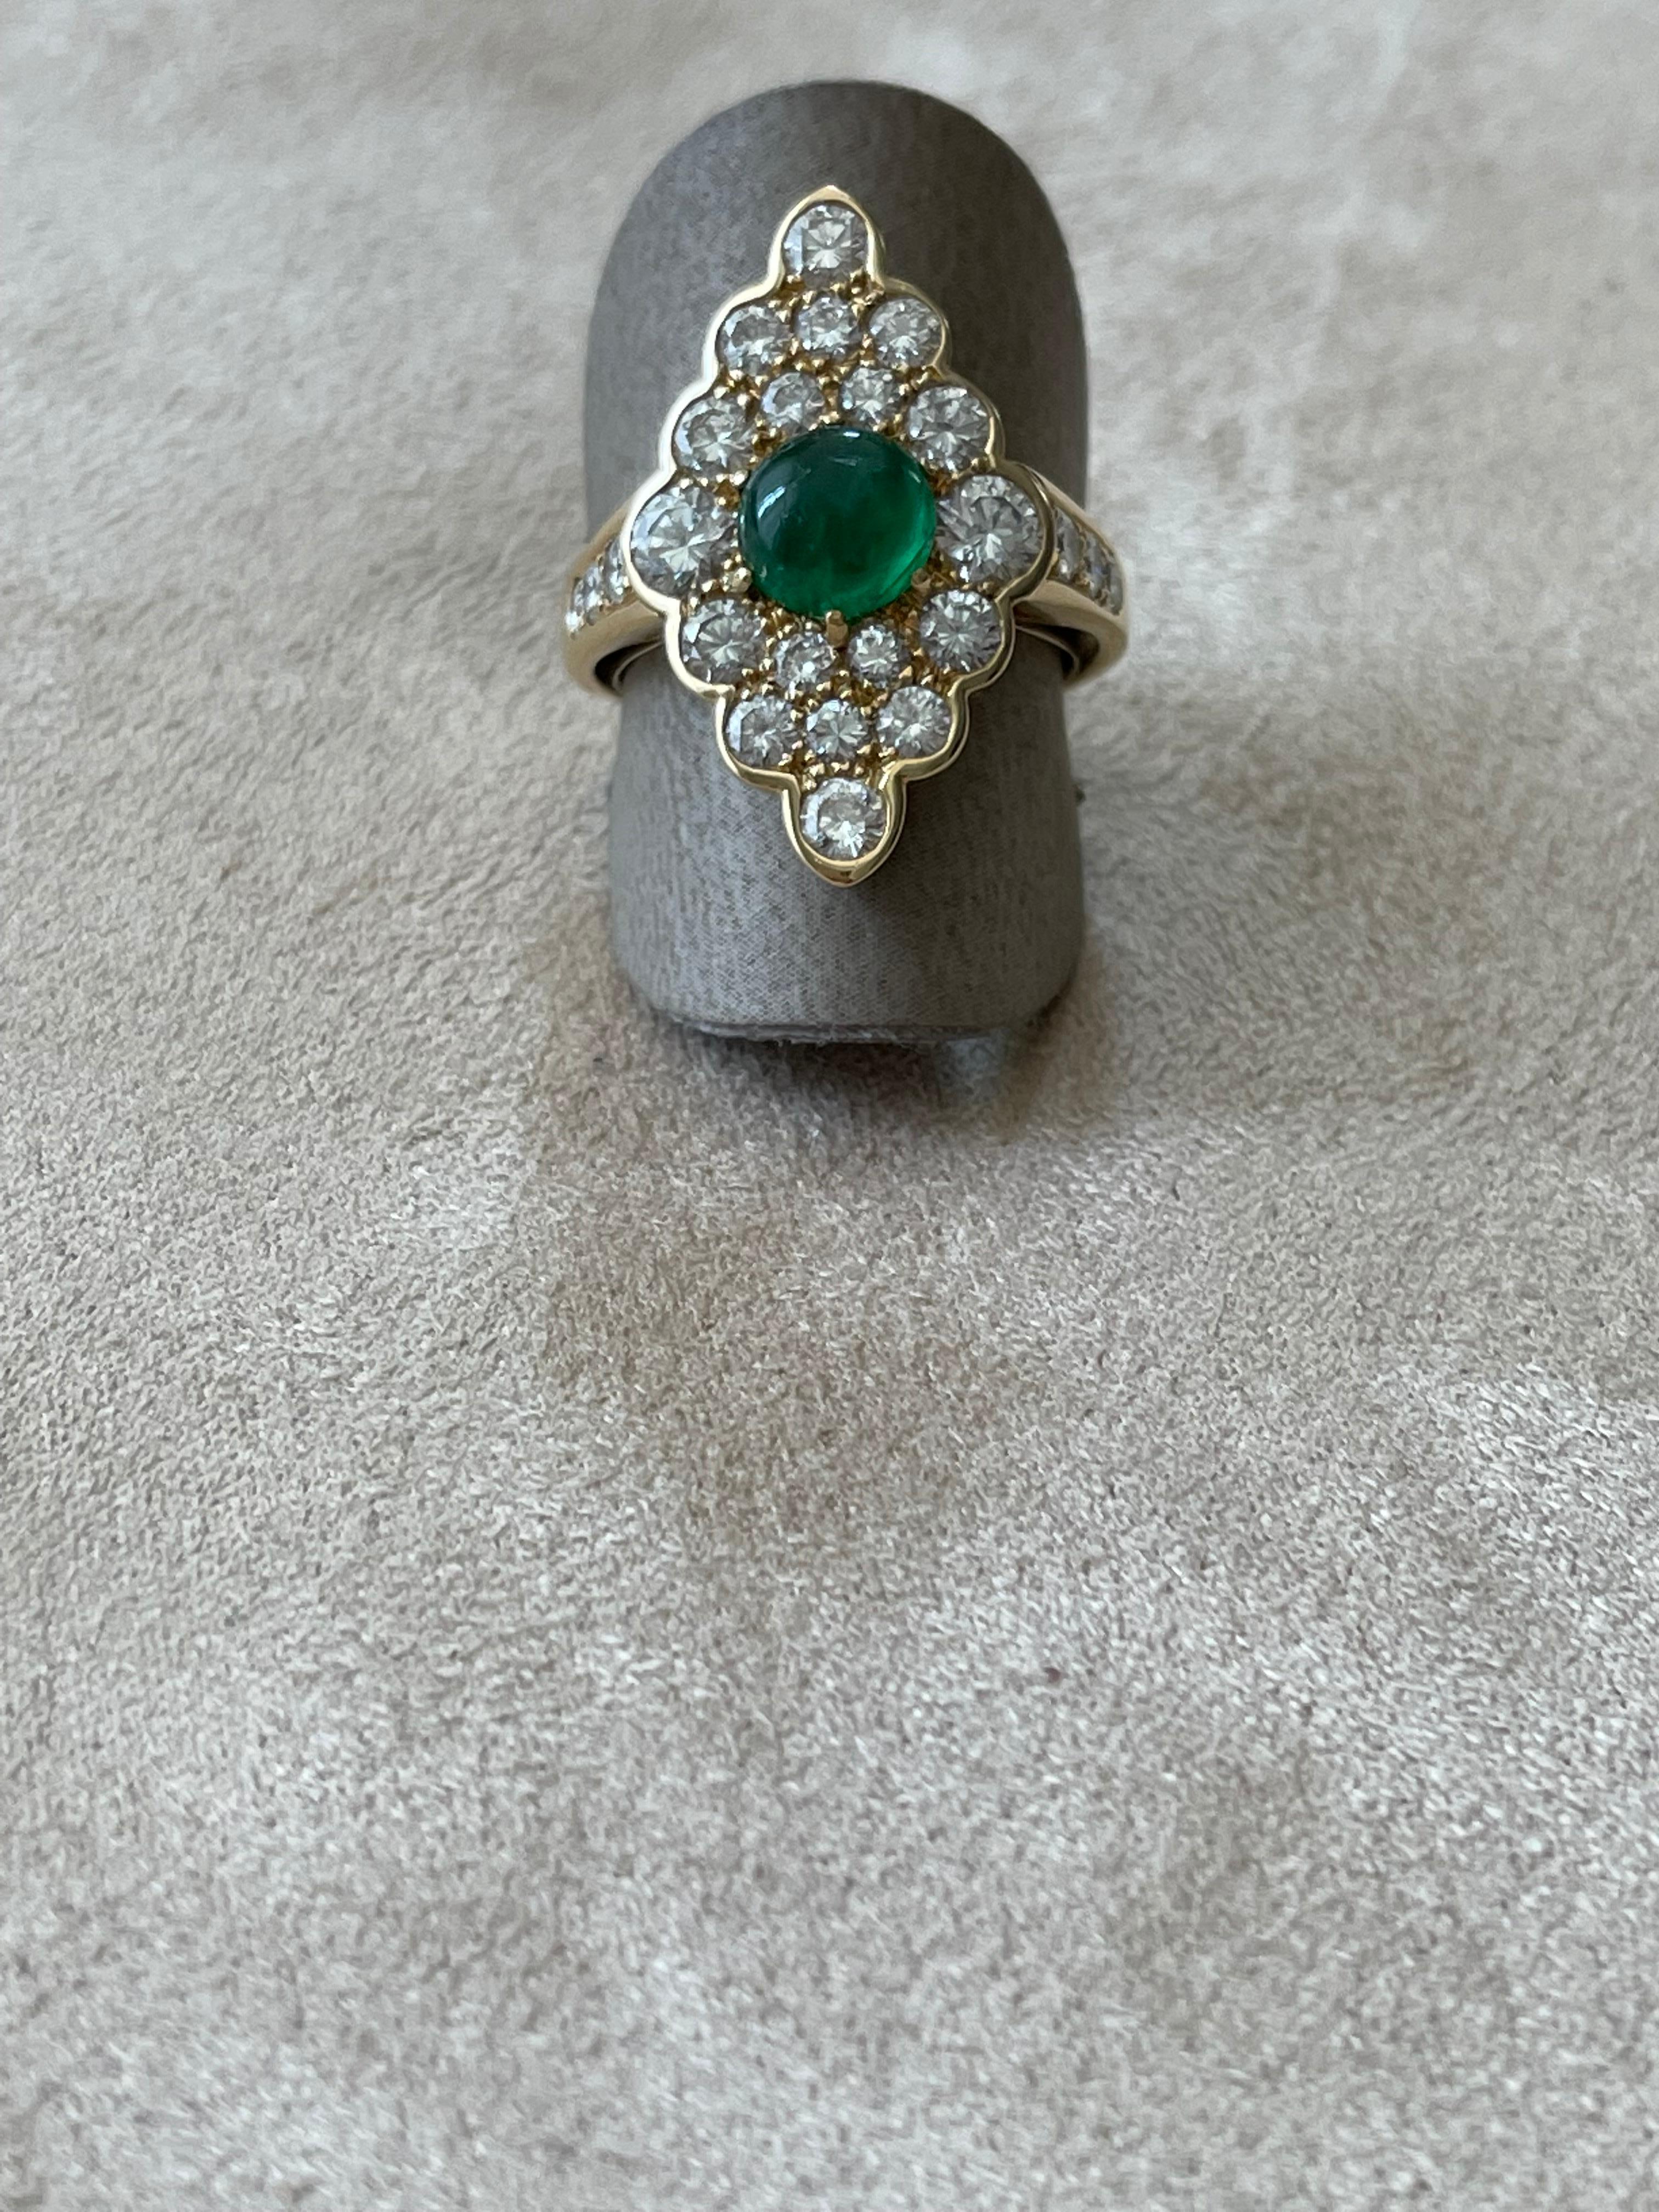 Vintage Ring reminiscent the Victorian style in 18 K yellow Gold set centrally with a Emerald Cabochon weighing approximately 1.20 ct and surrounded by 25 brilliant cut Diamonds , G color, vs clarity weighing approximately 2.50 ct. 
The ring is